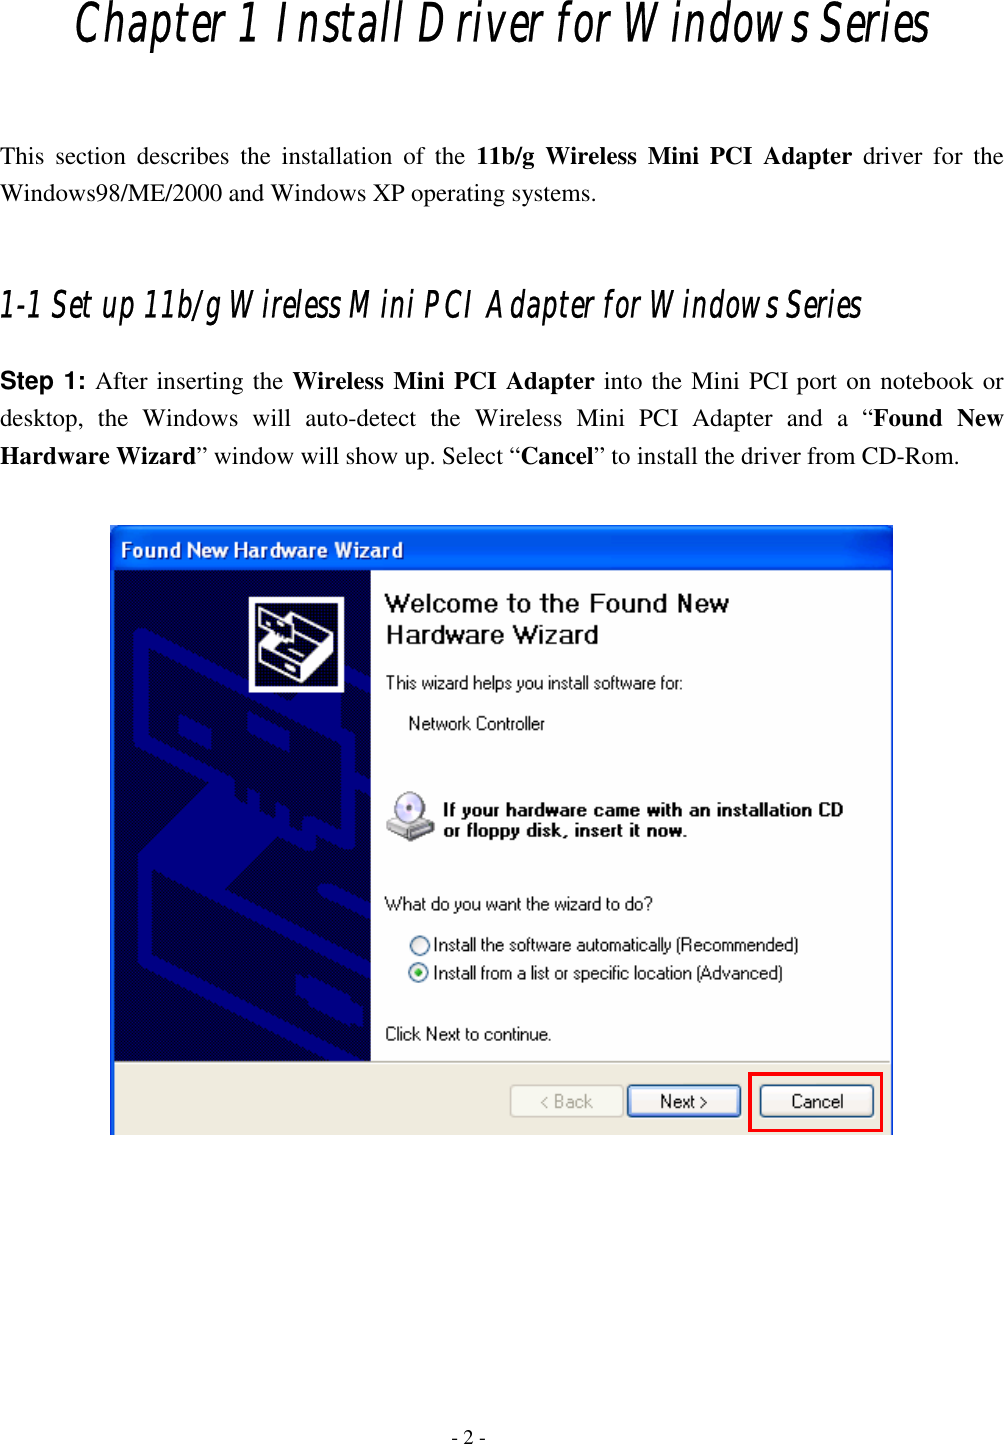                                                                                        - 2 -Chapter 1 Install Driver for Windows Series  This section describes the installation of the 11b/g Wireless Mini PCI Adapter driver for the Windows98/ME/2000 and Windows XP operating systems.  1-1 Set up 11b/g Wireless Mini PCI Adapter for Windows Series Step 1: After inserting the Wireless Mini PCI Adapter into the Mini PCI port on notebook or desktop, the Windows will auto-detect the Wireless Mini PCI Adapter and a “Found New Hardware Wizard” window will show up. Select “Cancel” to install the driver from CD-Rom.         